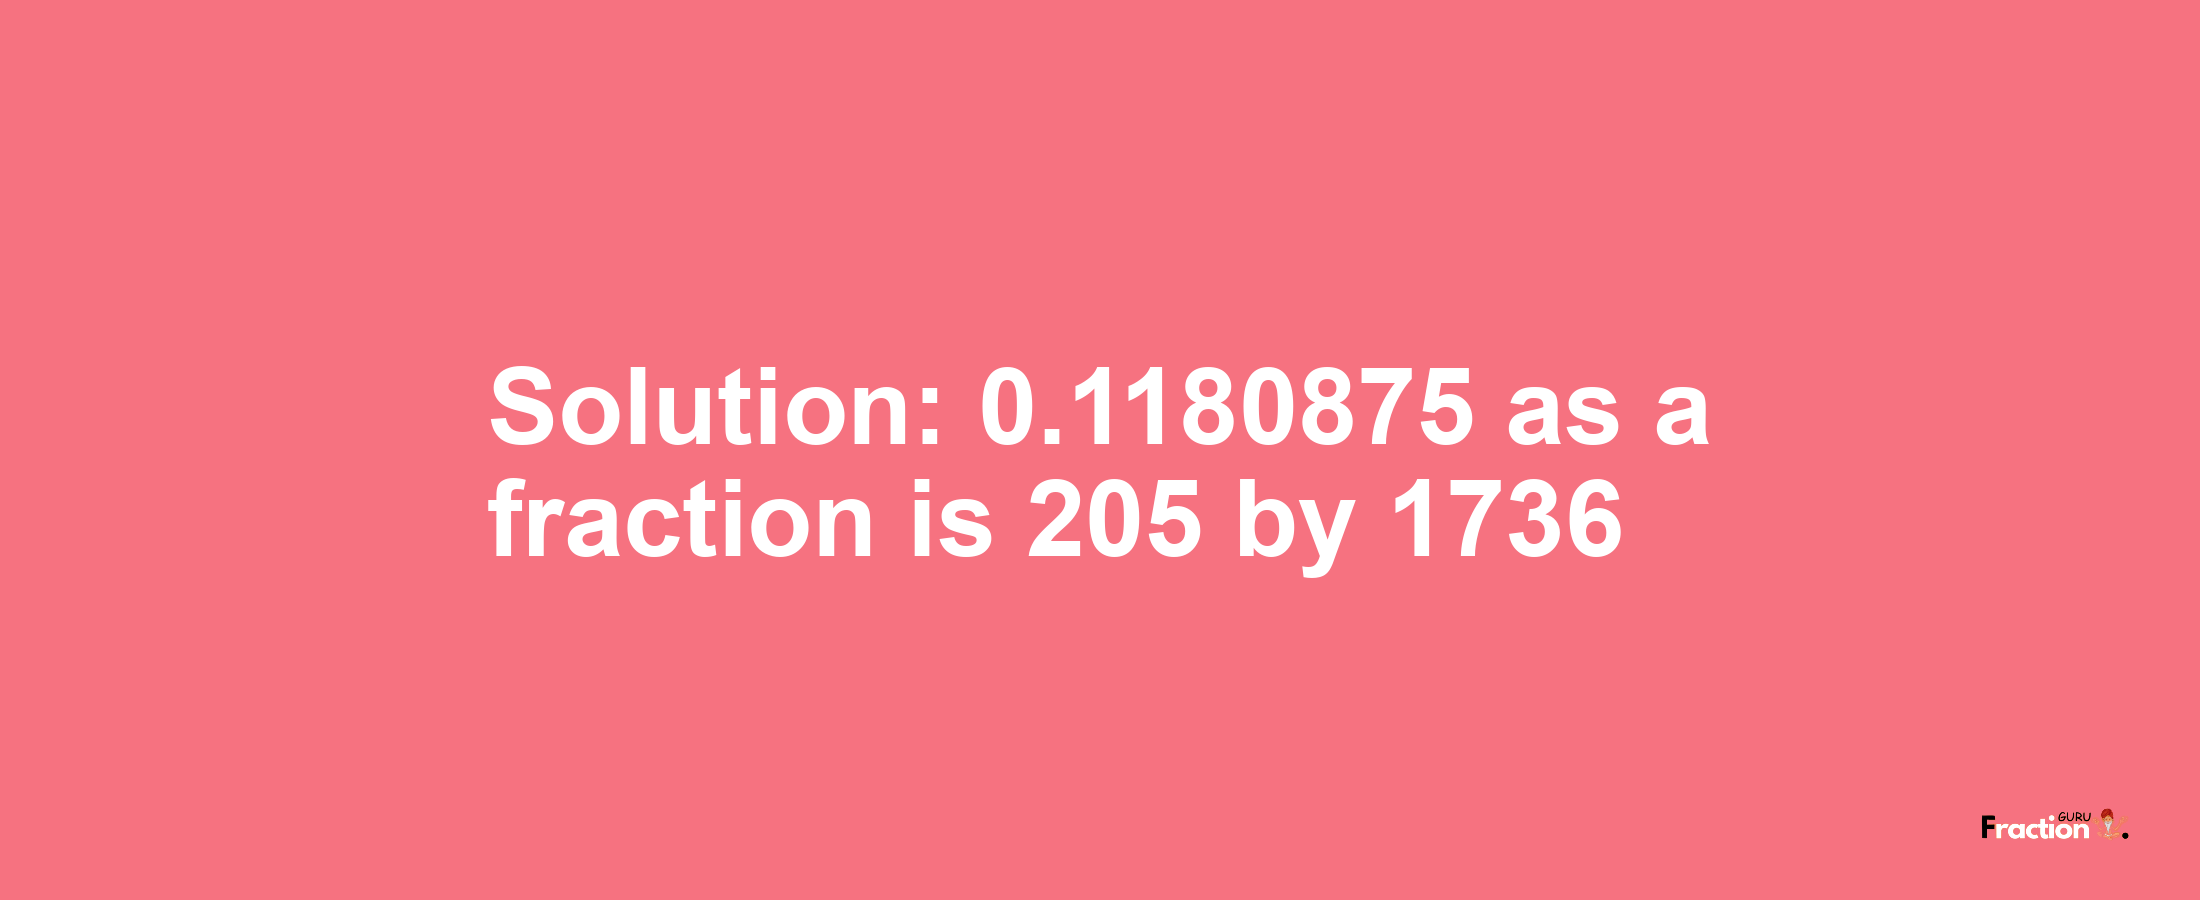 Solution:0.1180875 as a fraction is 205/1736